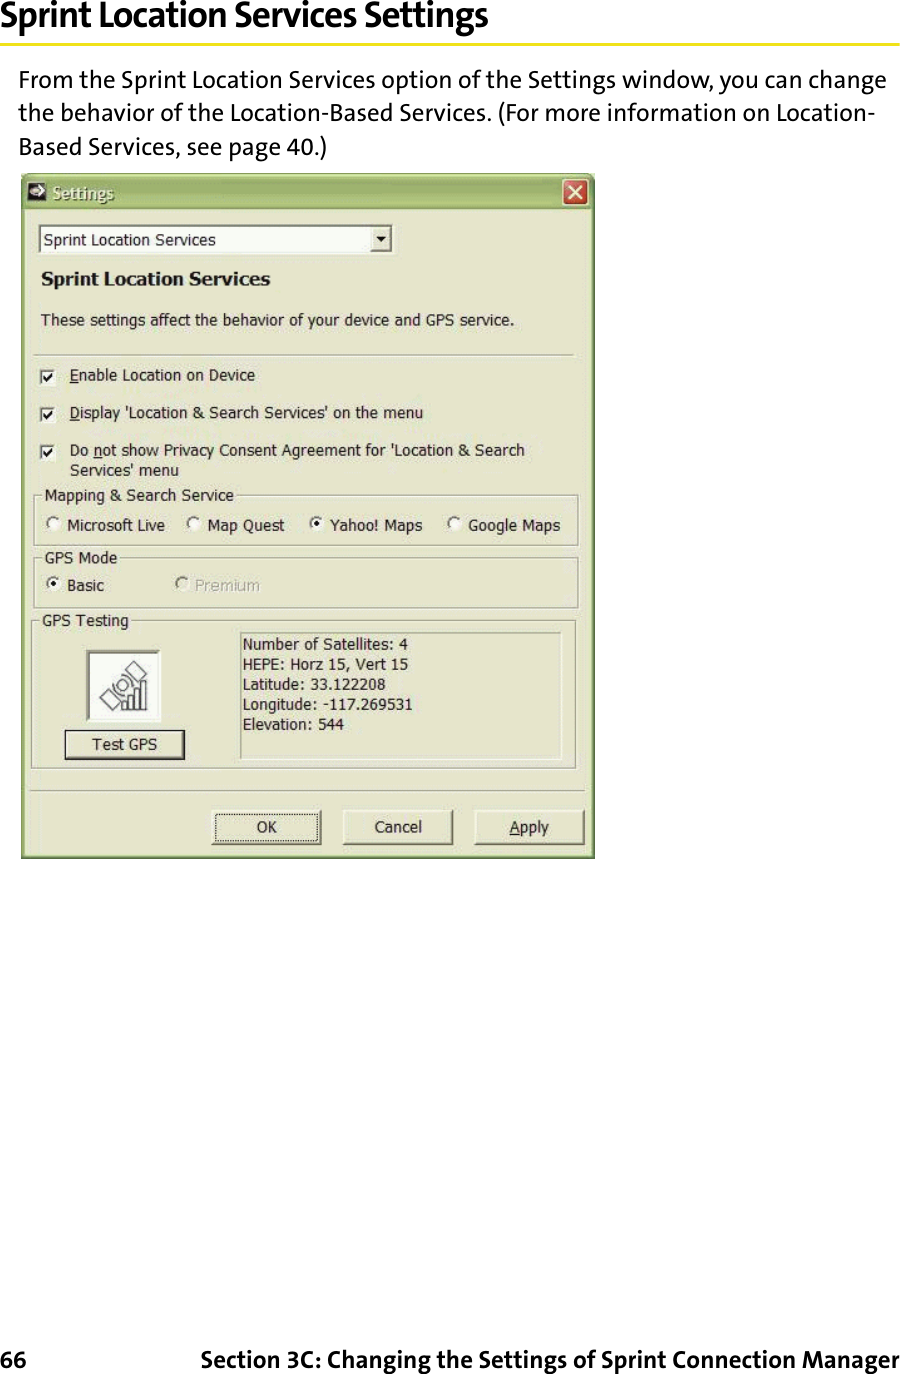 66 Section 3C: Changing the Settings of Sprint Connection ManagerSprint Location Services SettingsFrom the Sprint Location Services option of the Settings window, you can change the behavior of the Location-Based Services. (For more information on Location-Based Services, see page 40.)